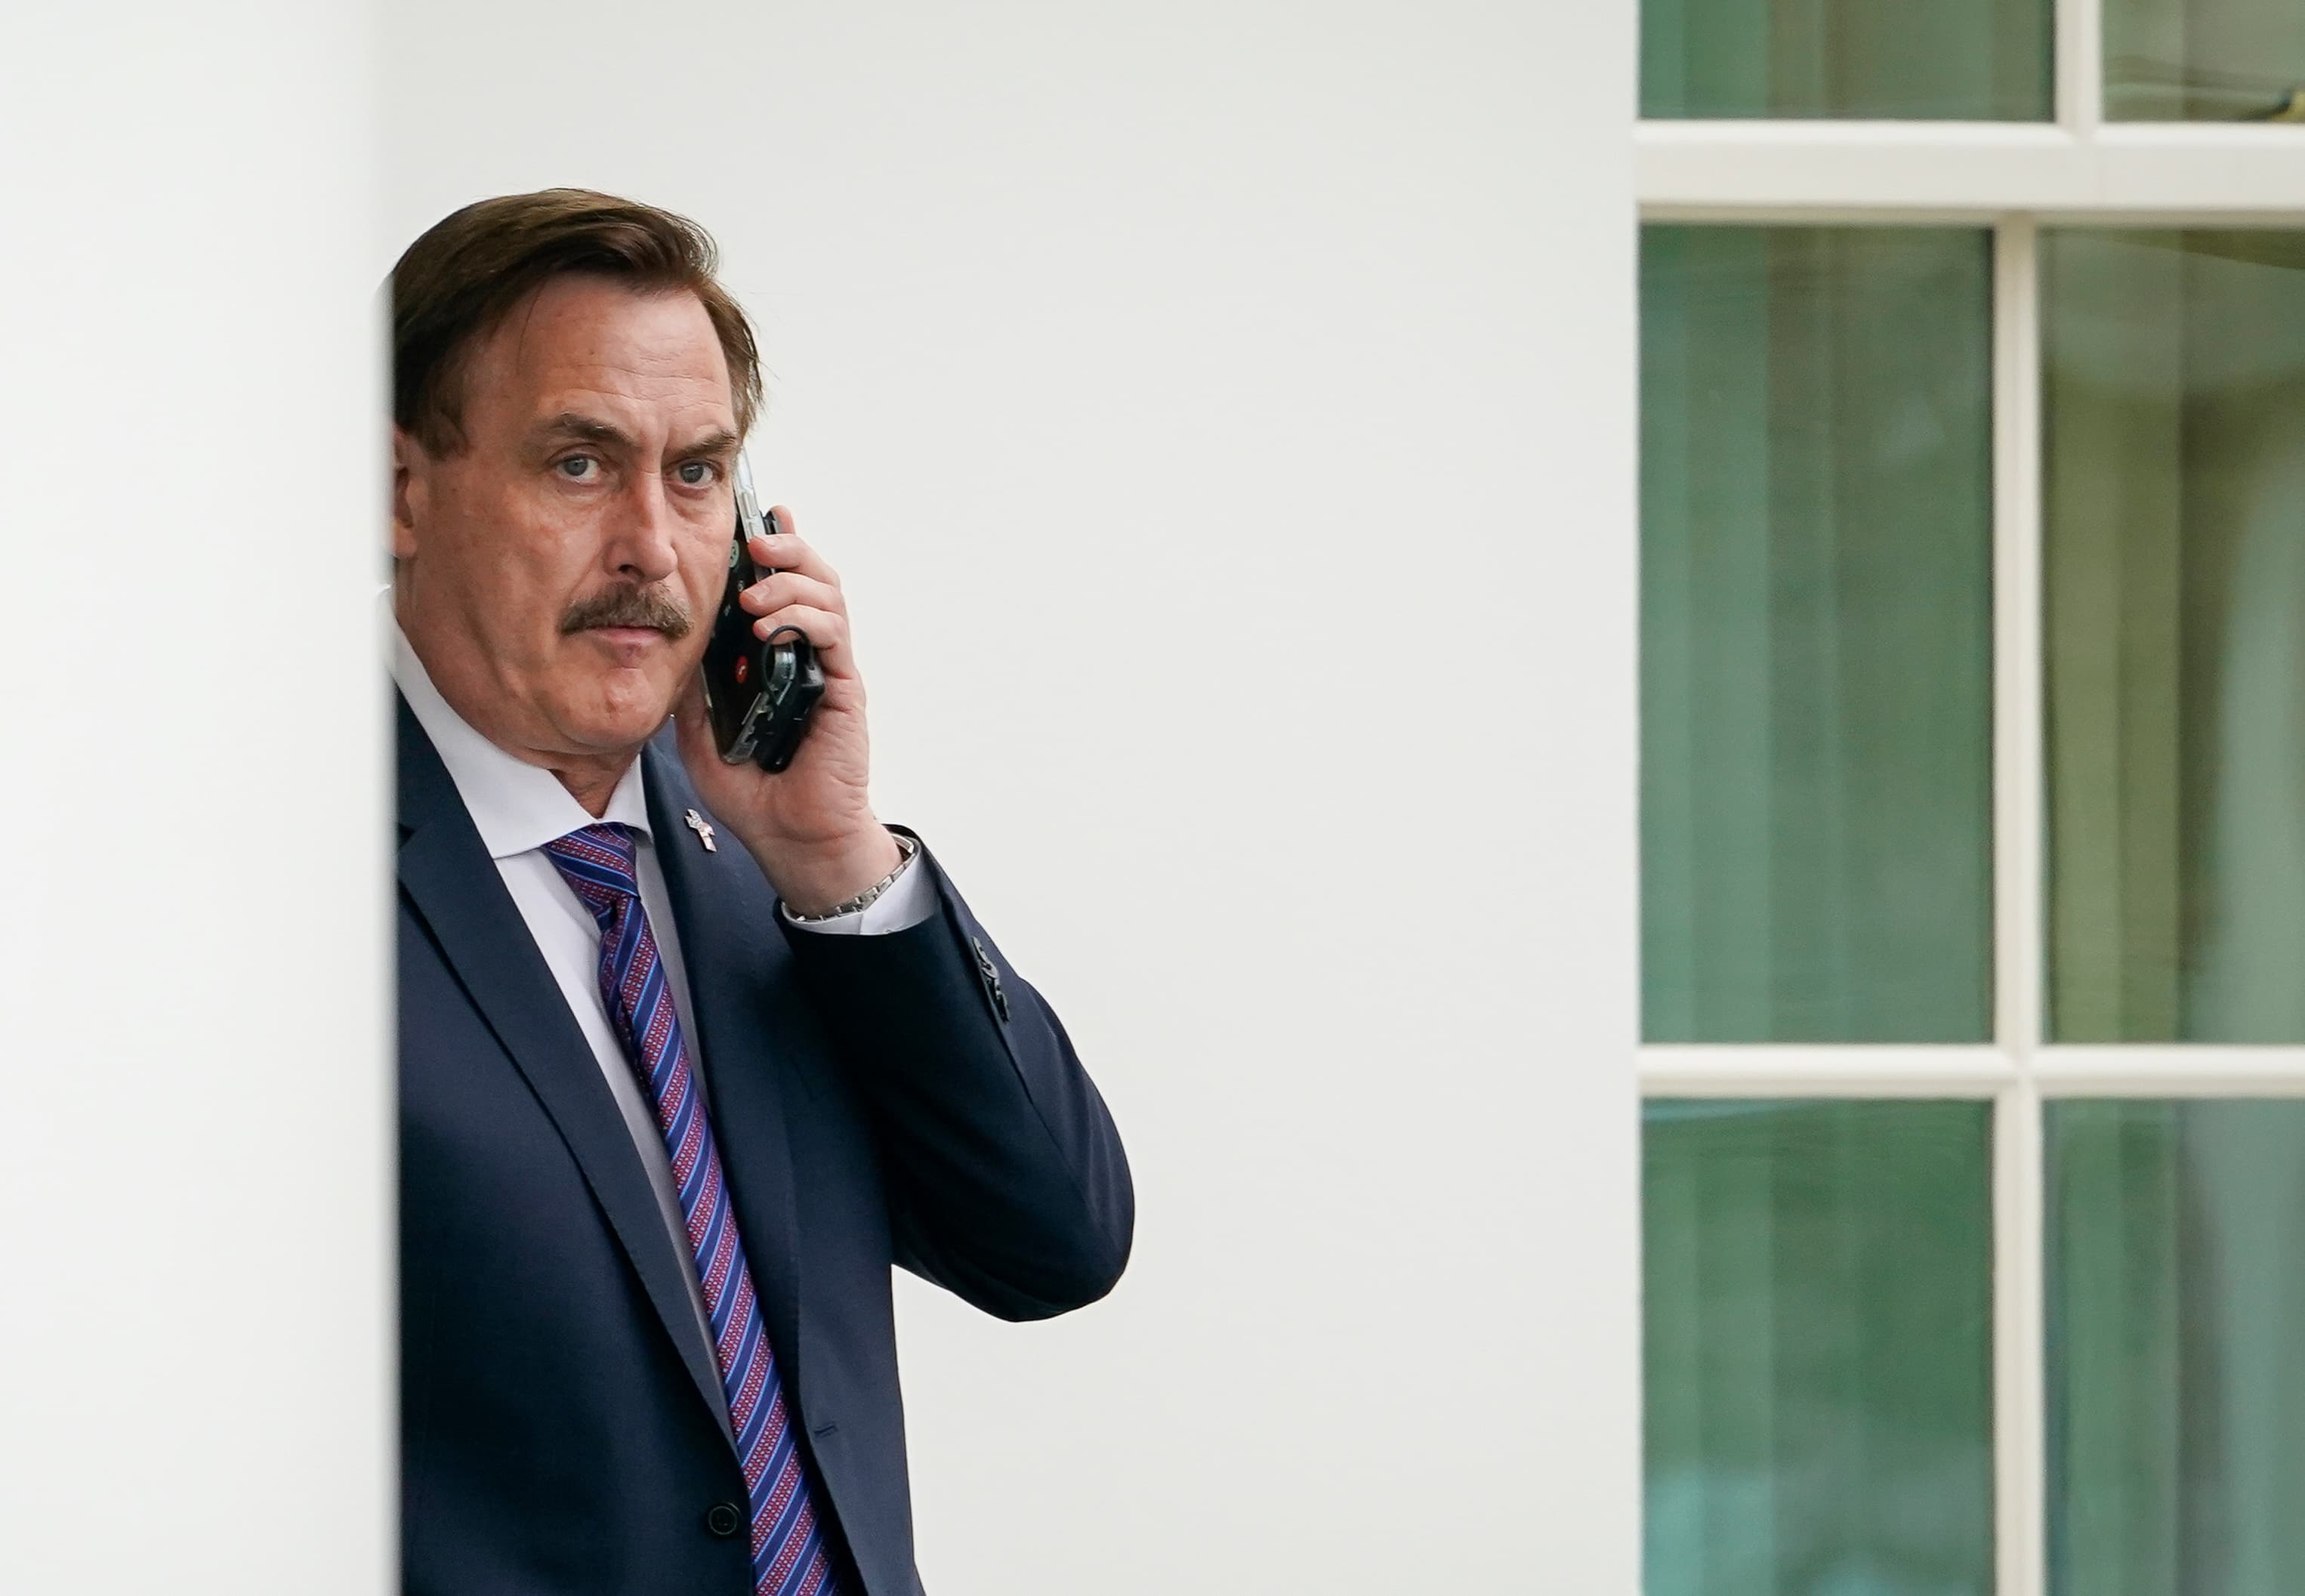  Mike Lindell funds new movie "Selection Code" to promote baseless voter fraud claims